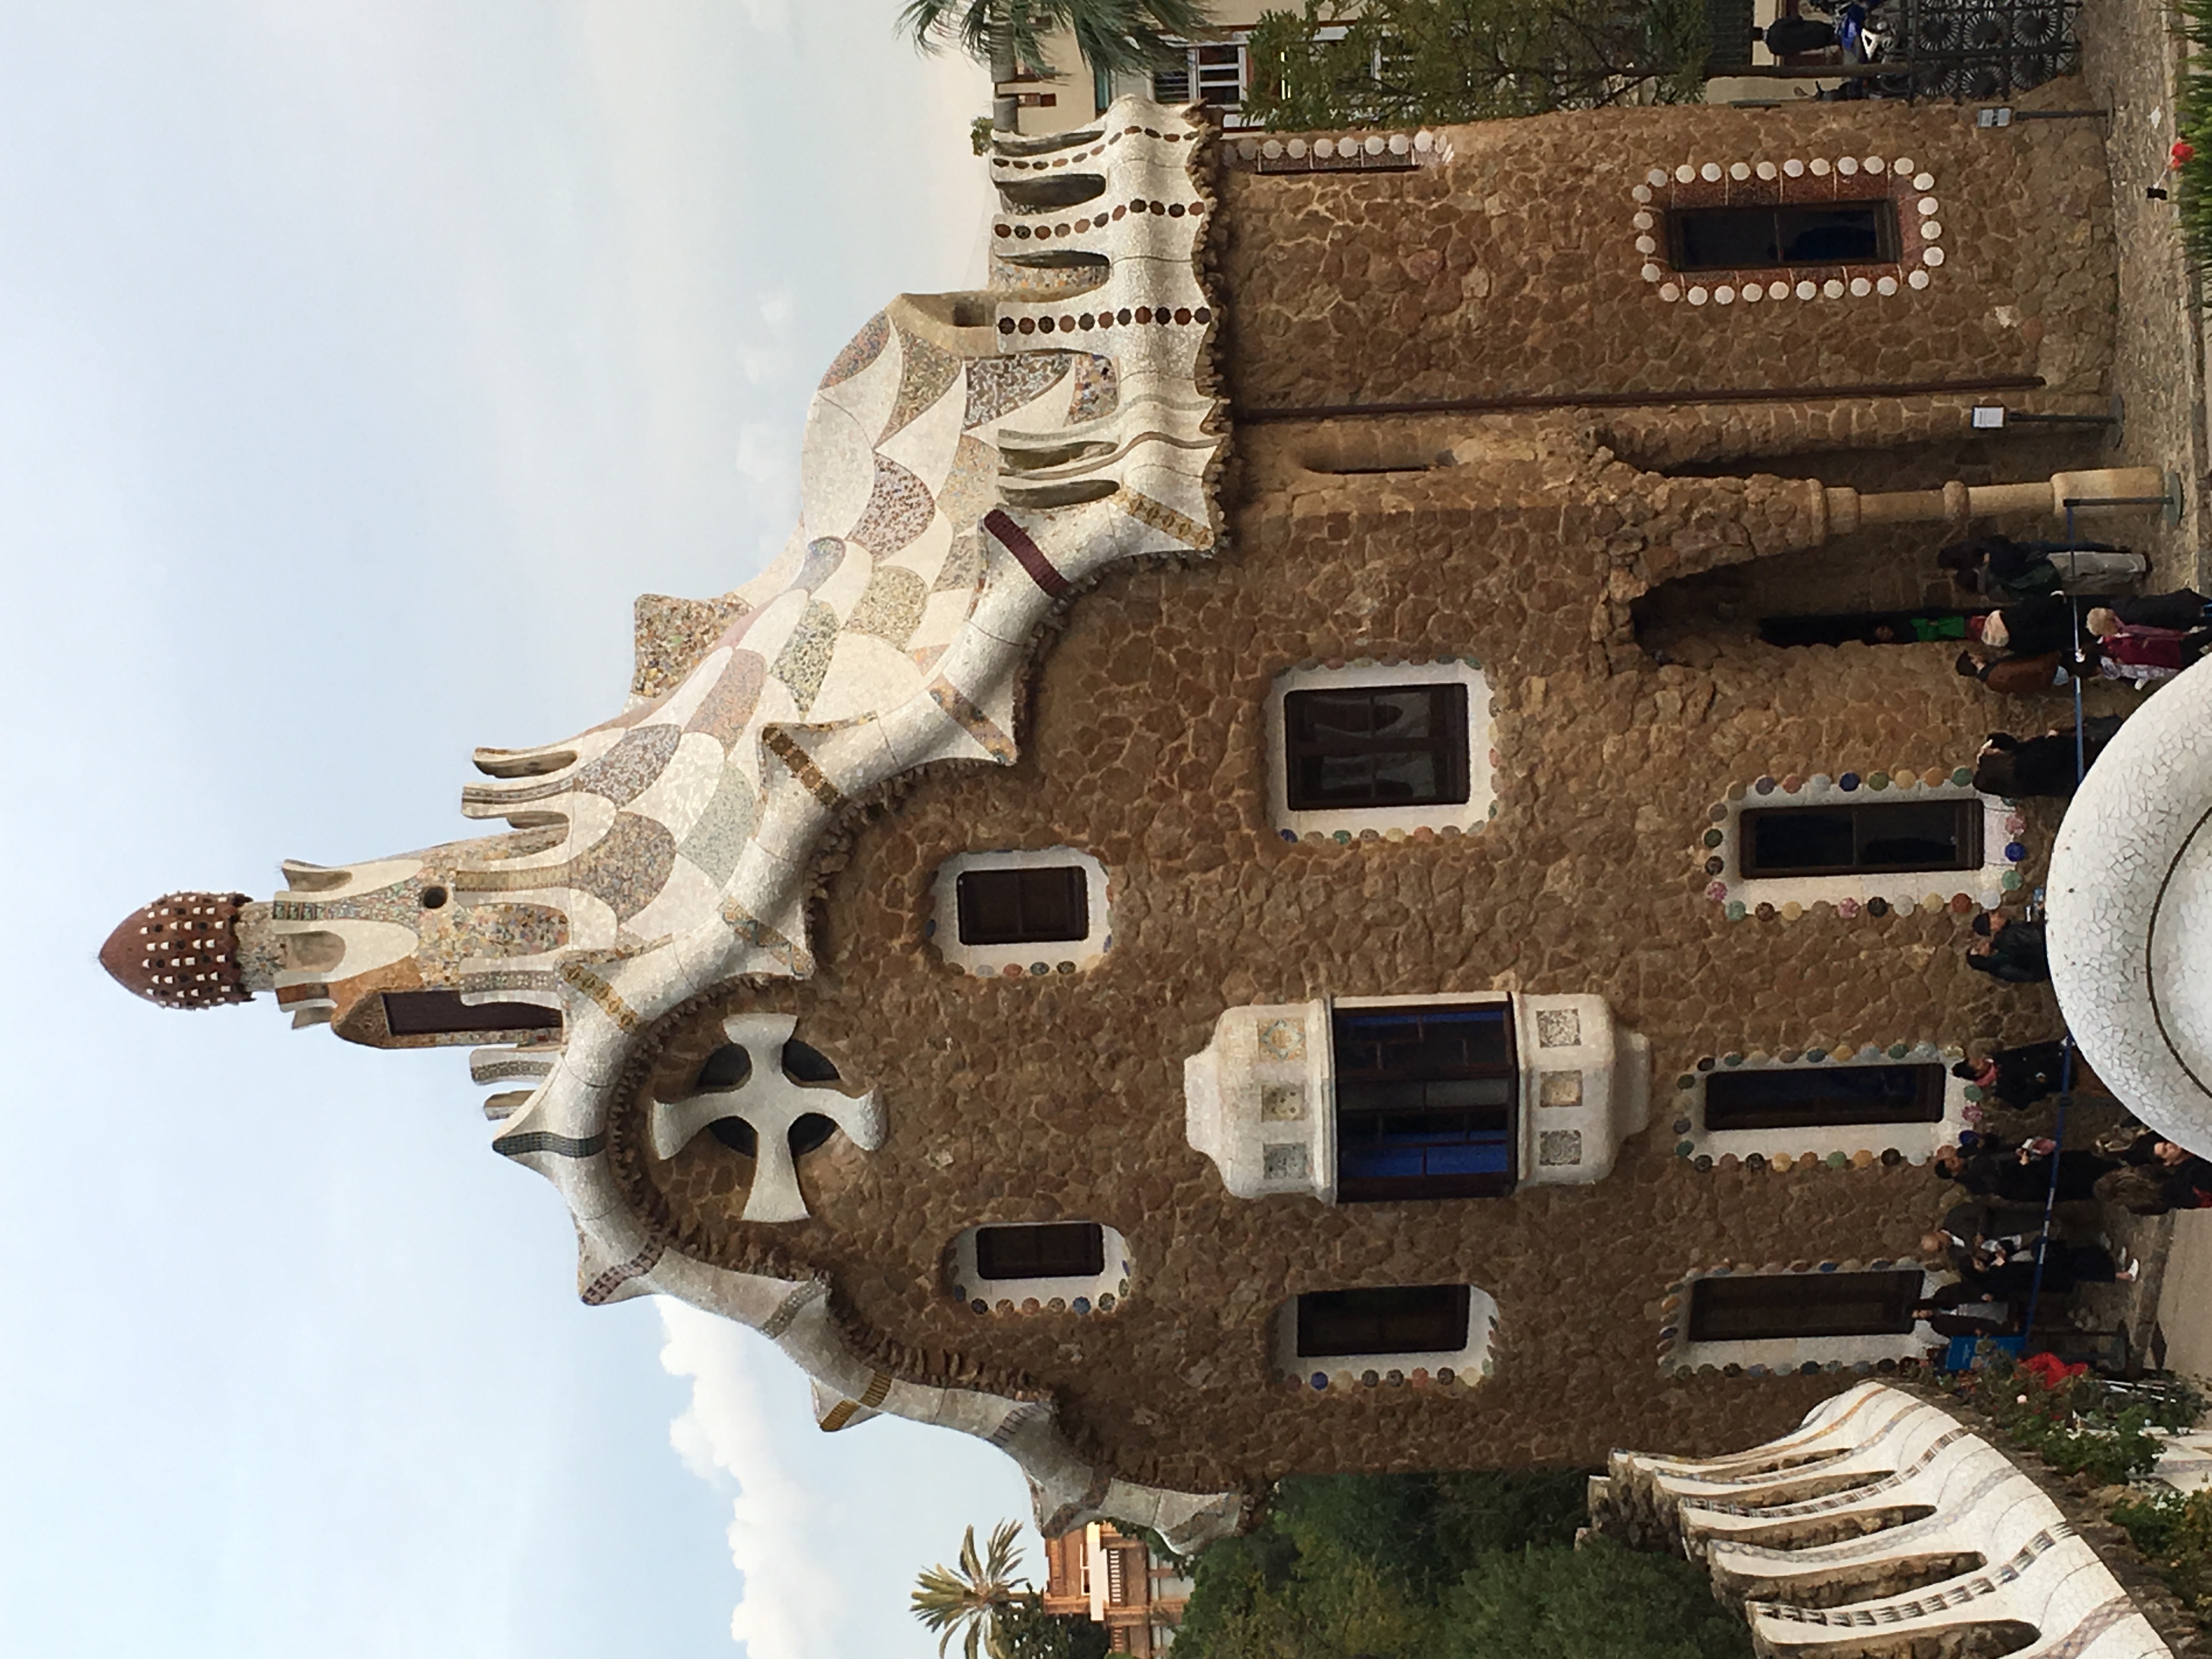 A quirky Gaudí house leaning